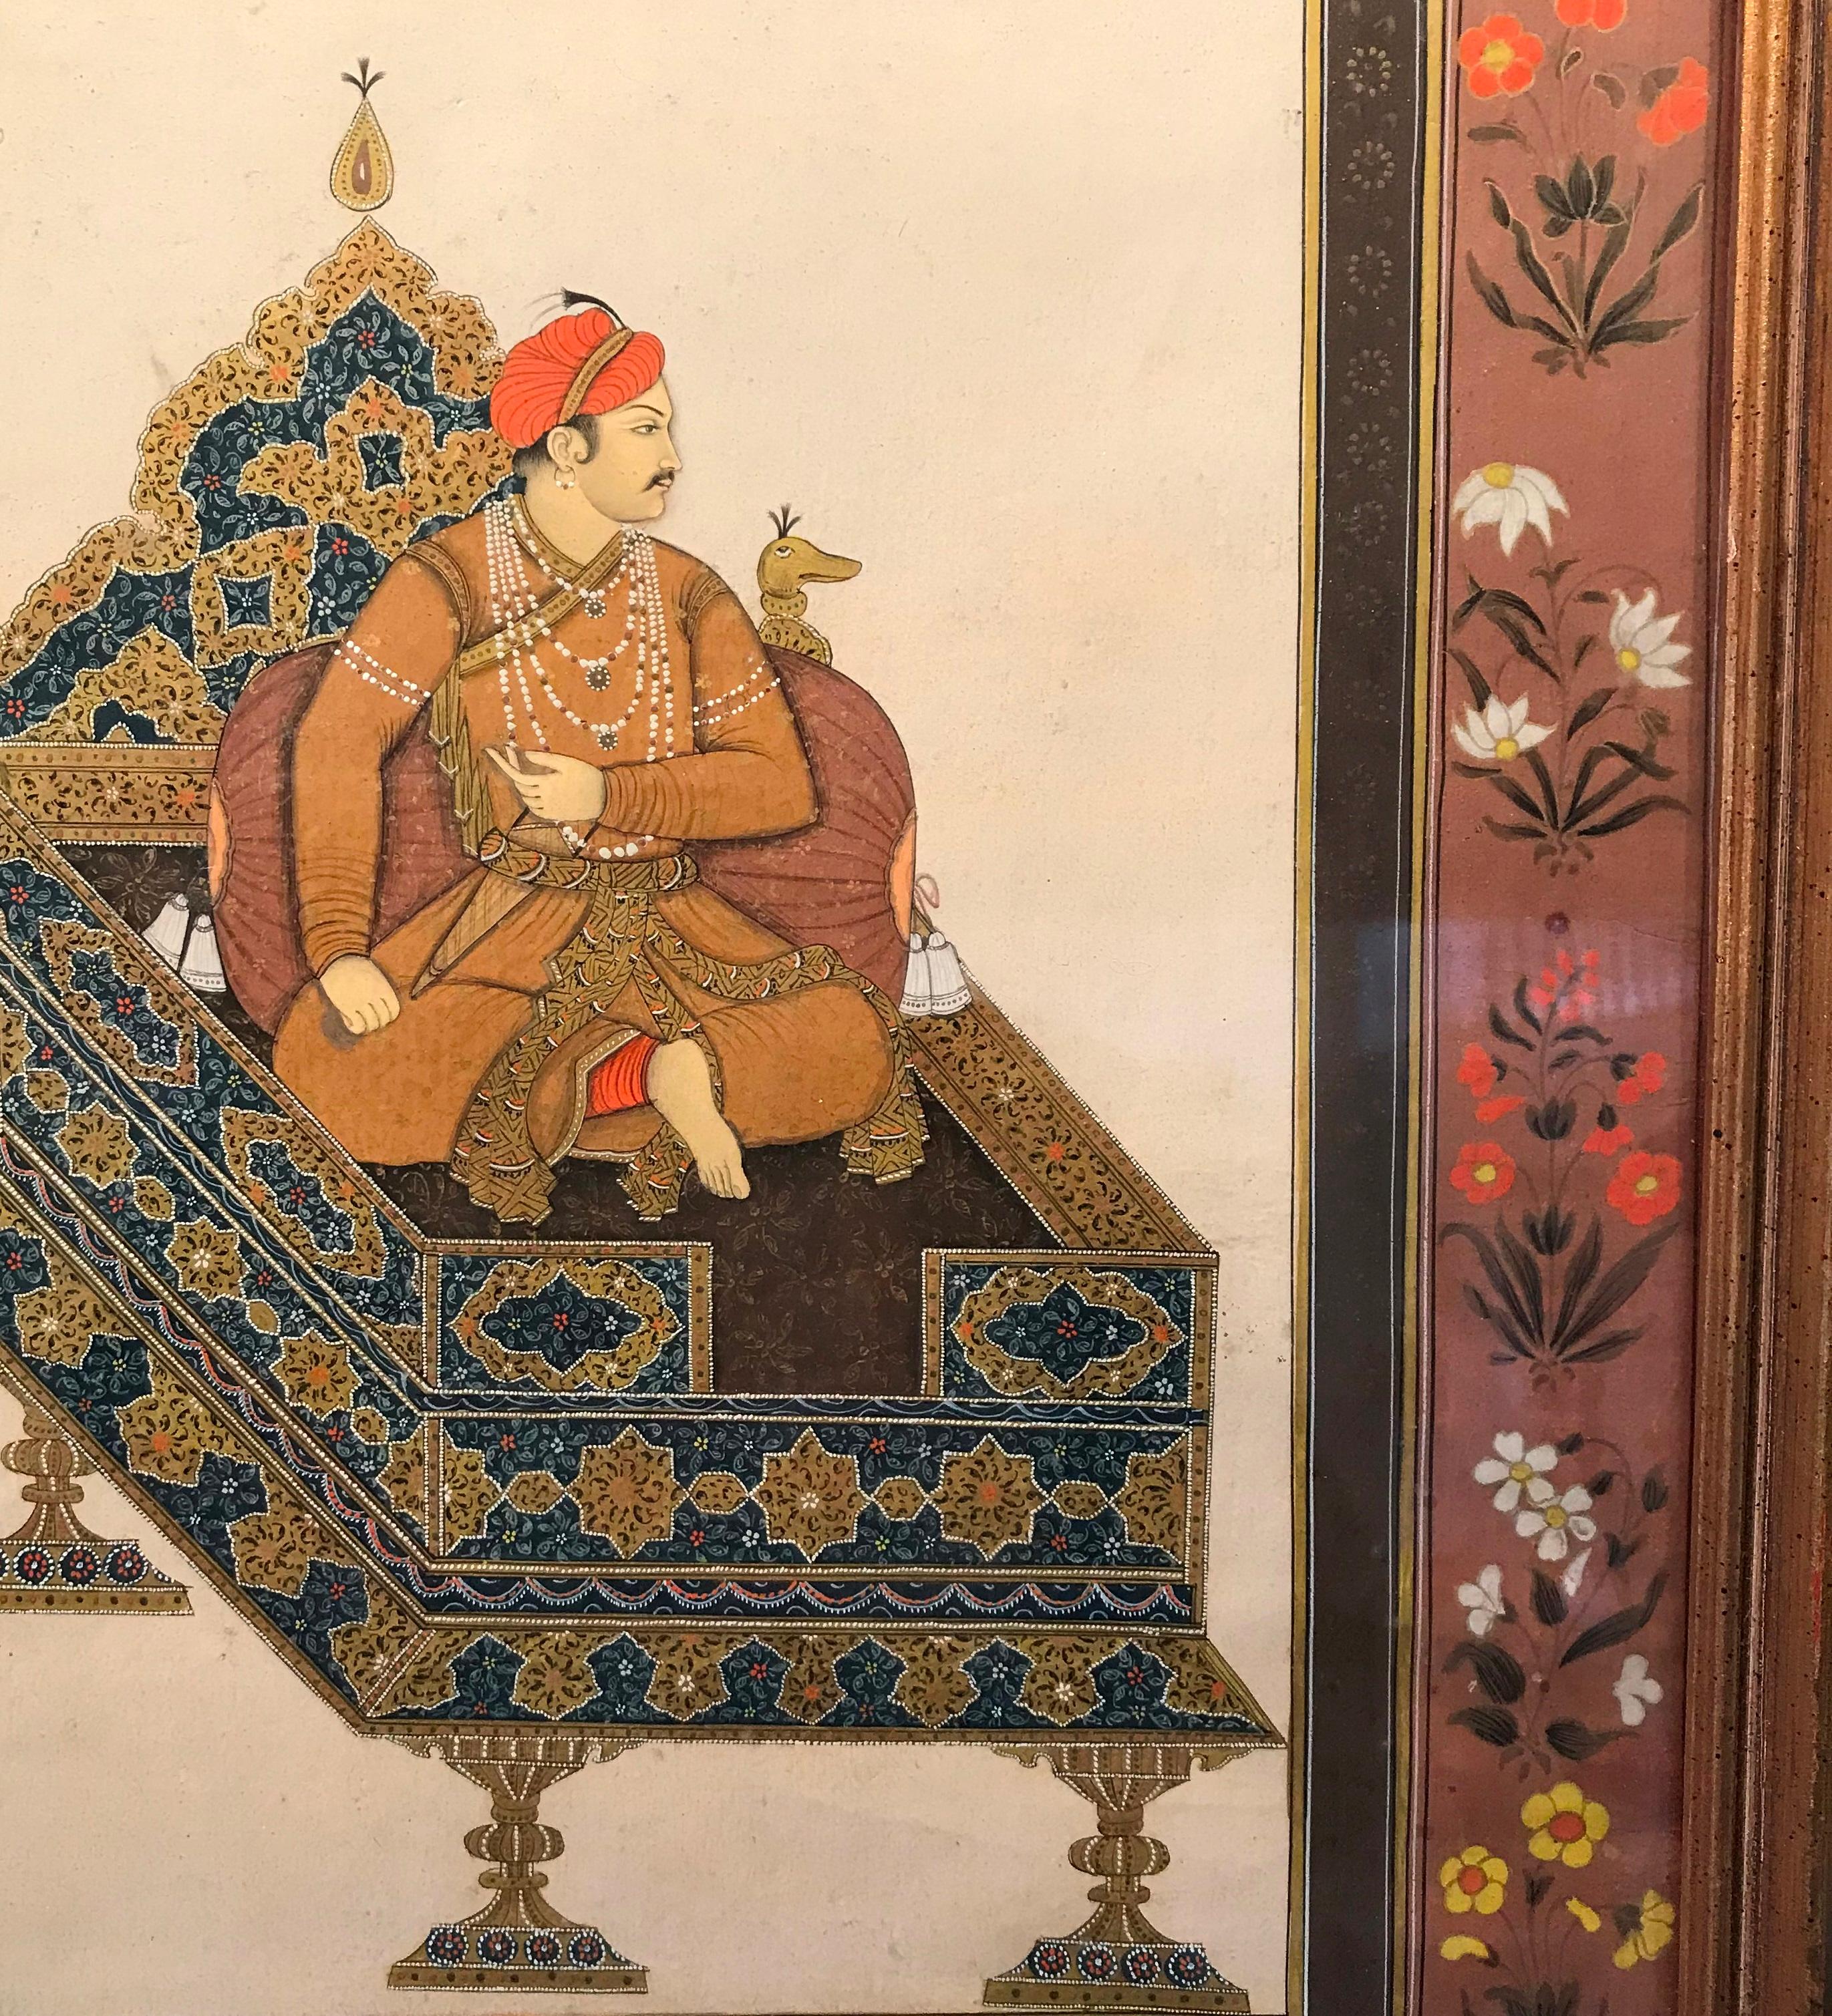 Antique Indo Persian Mughal Miniature Painting Portrait of Prince Salim Jahangir For Sale 4